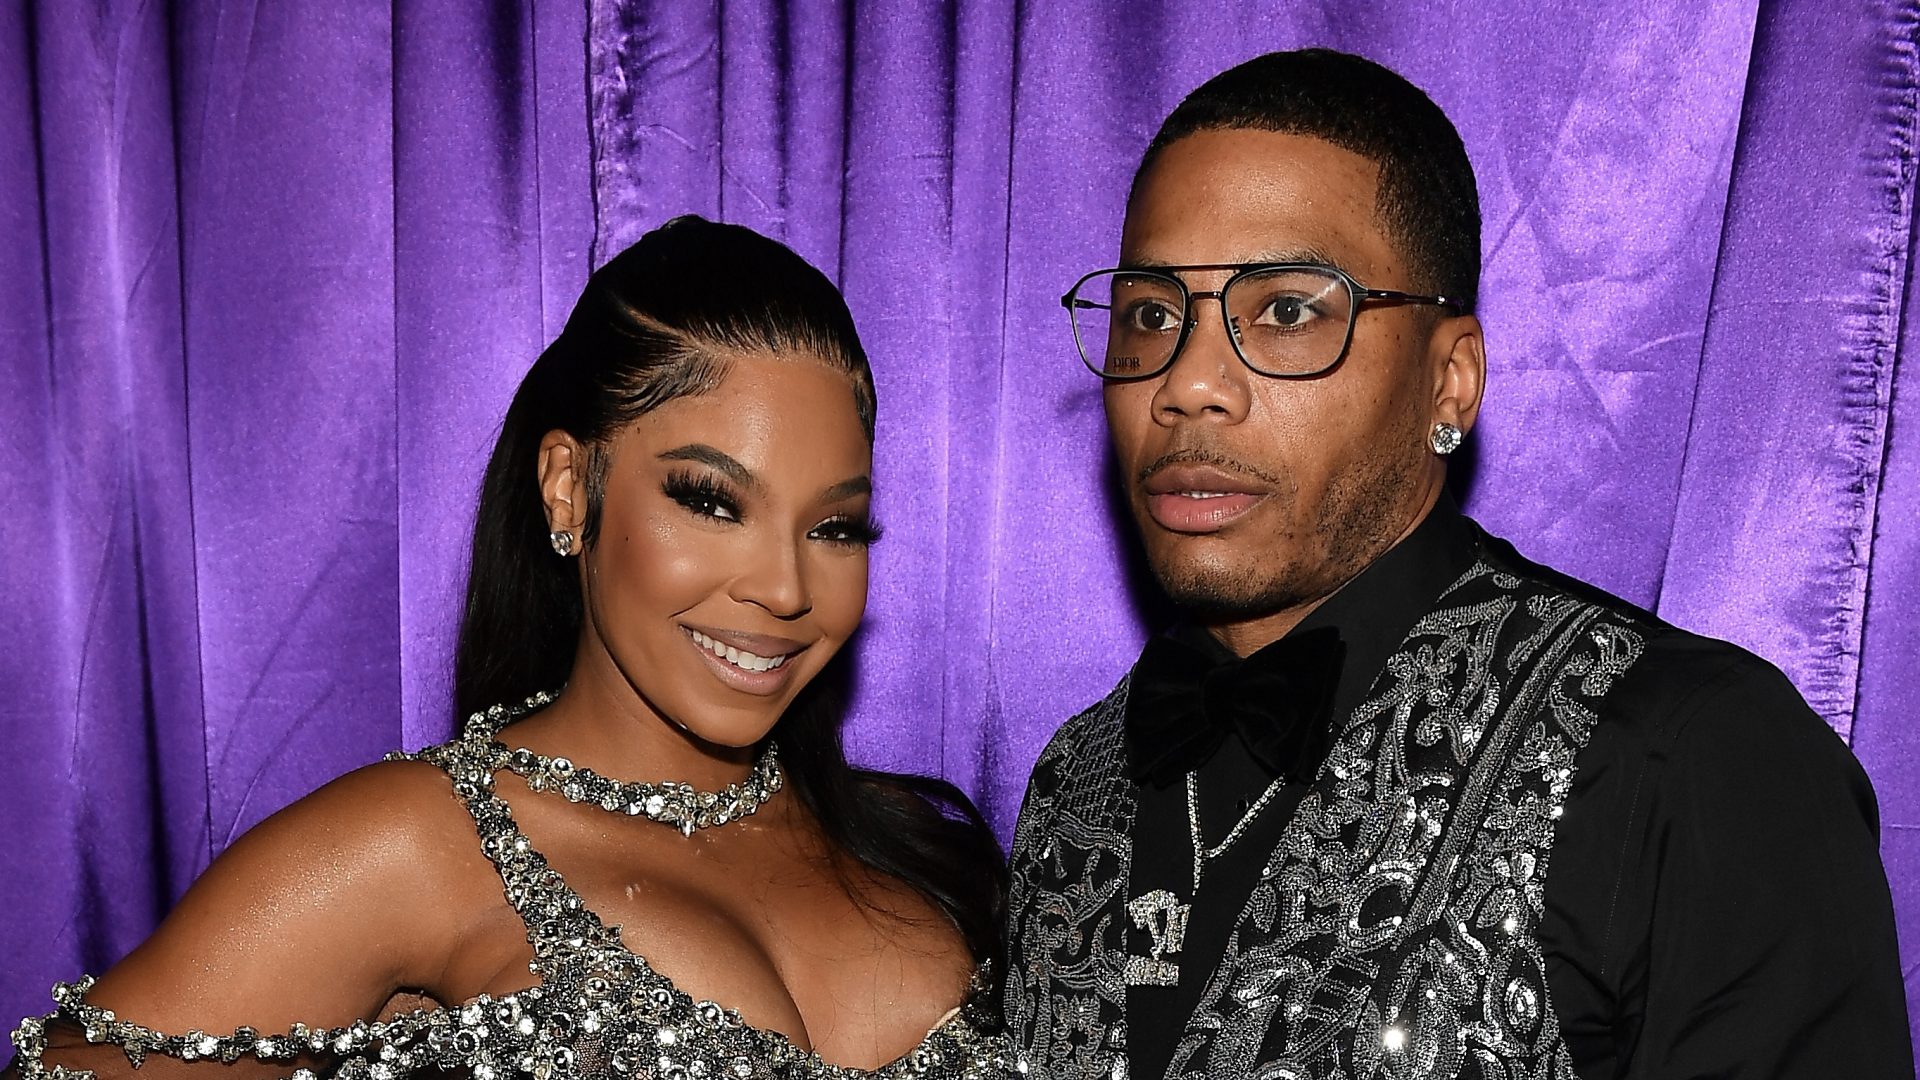 Bun In The Oven? Social Media Users Speculate Ashanti May Be Expecting (Video) thumbnail